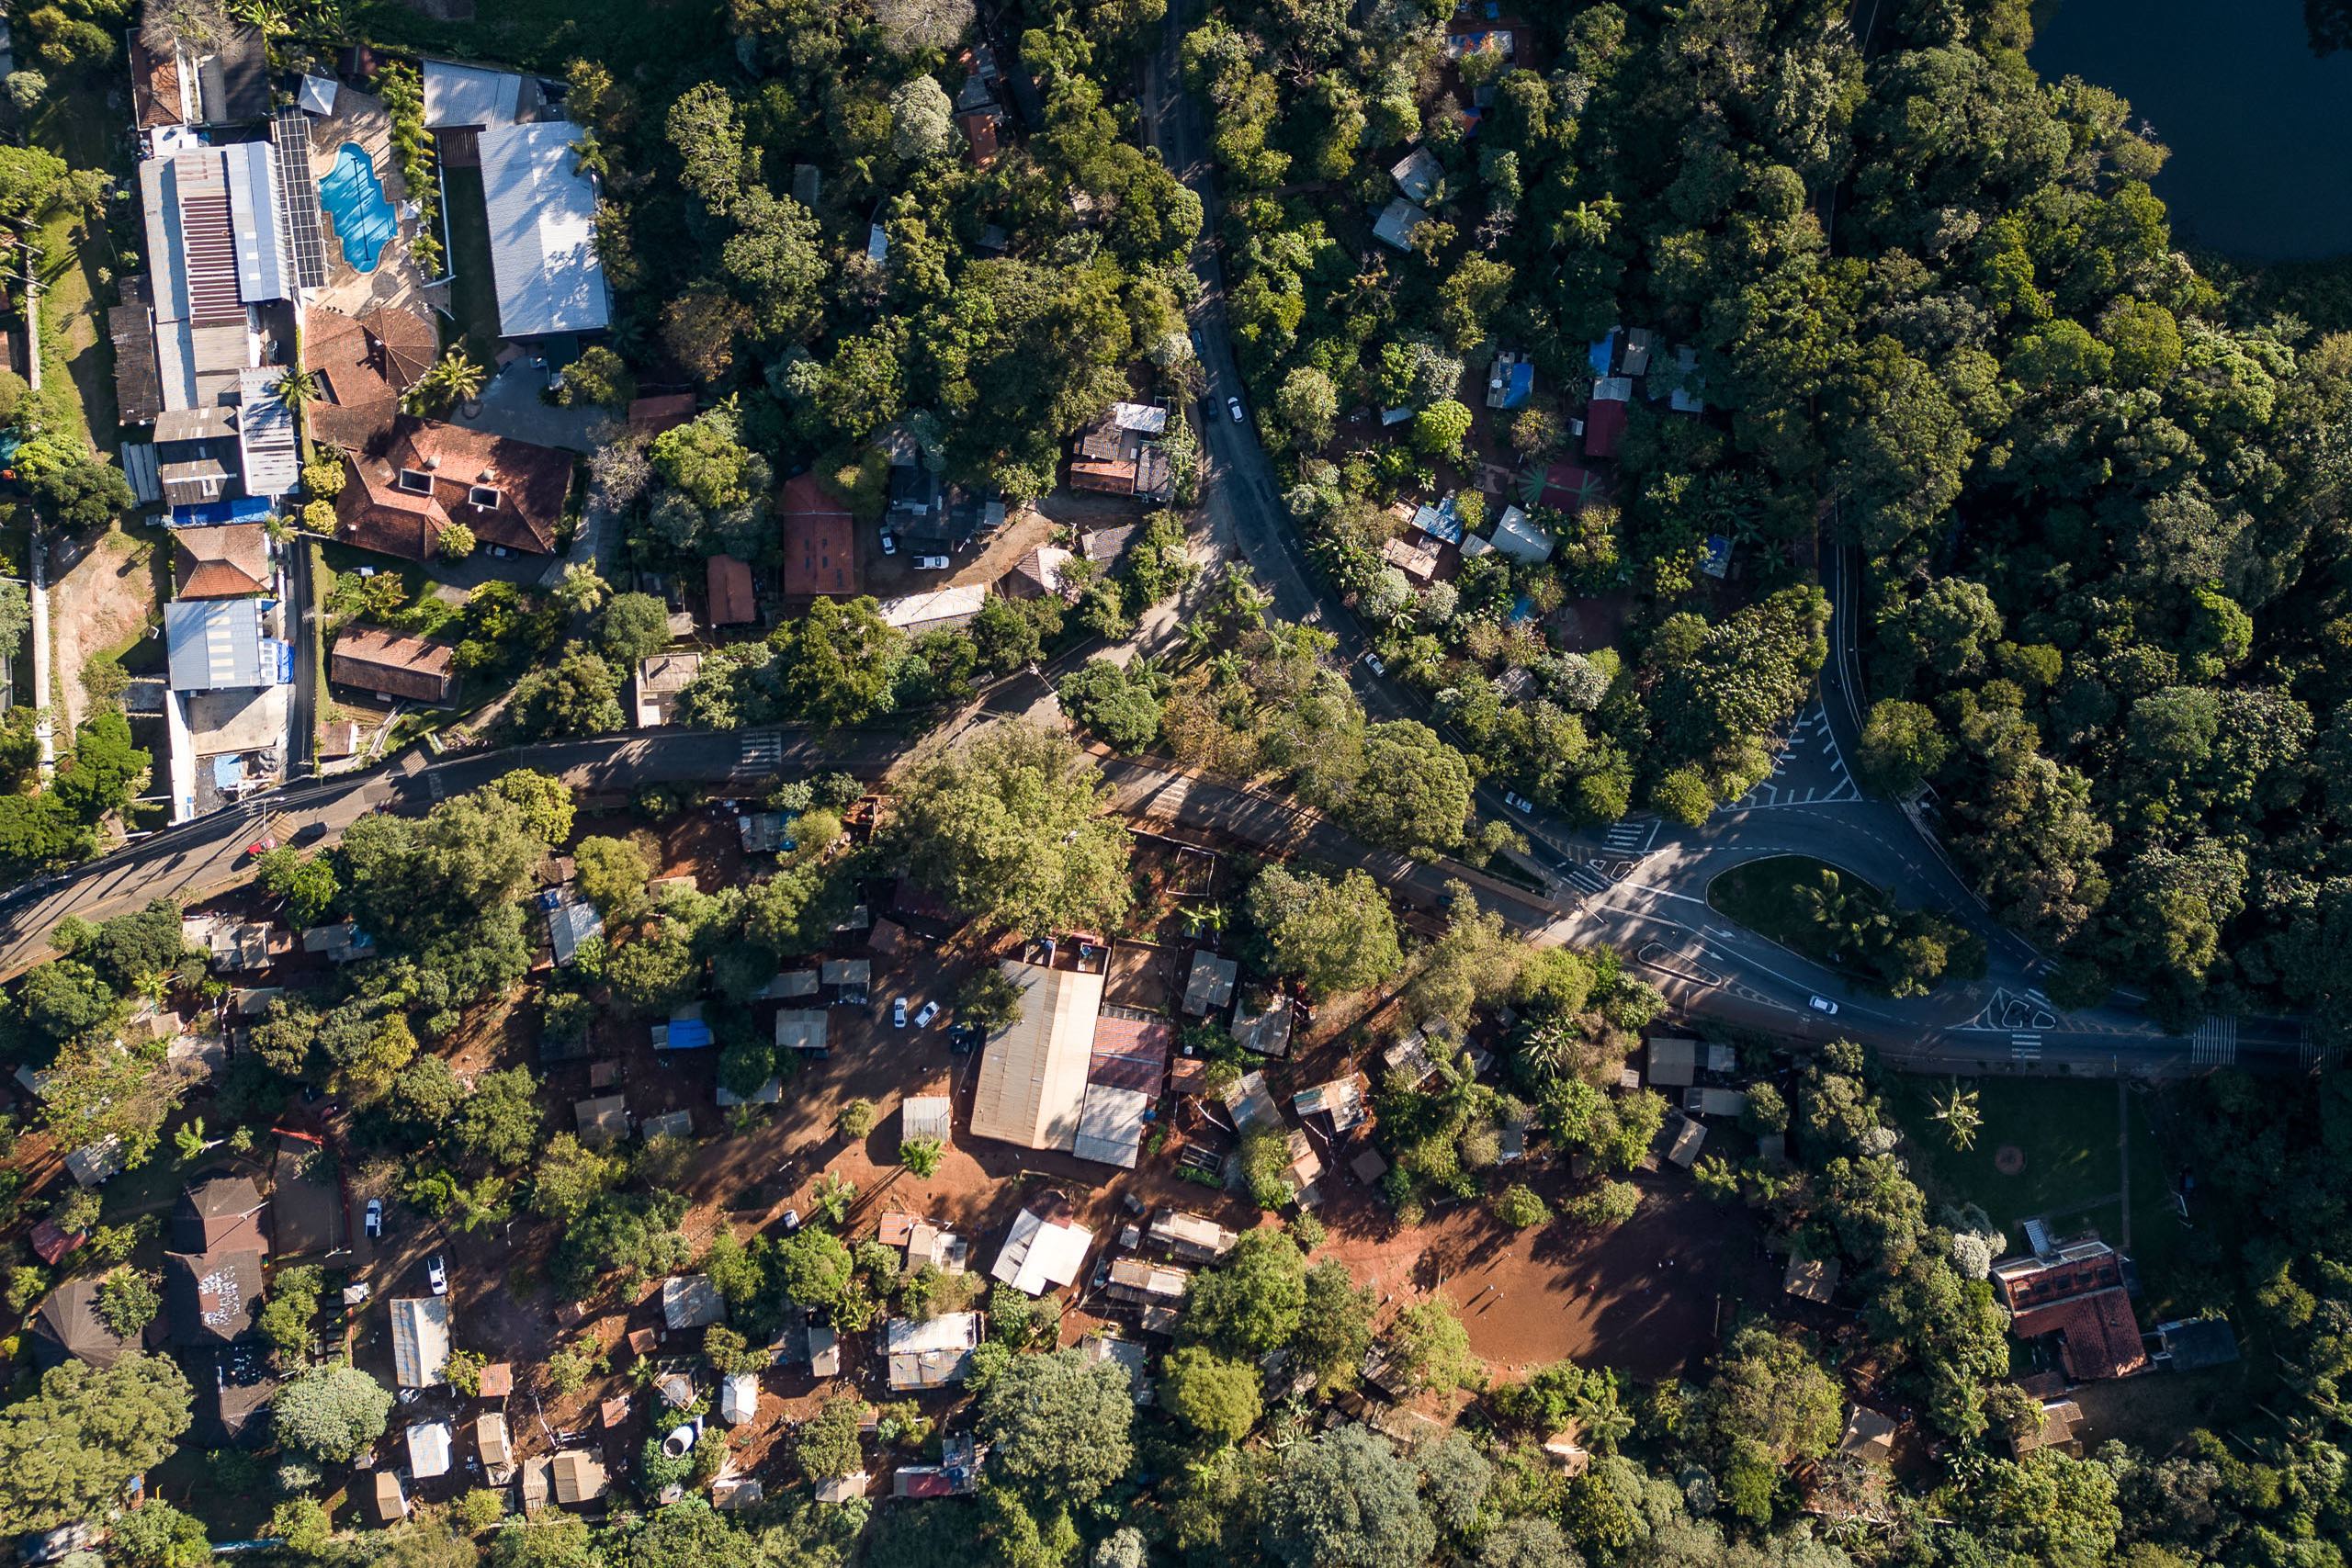 Aerial view of houses and trees